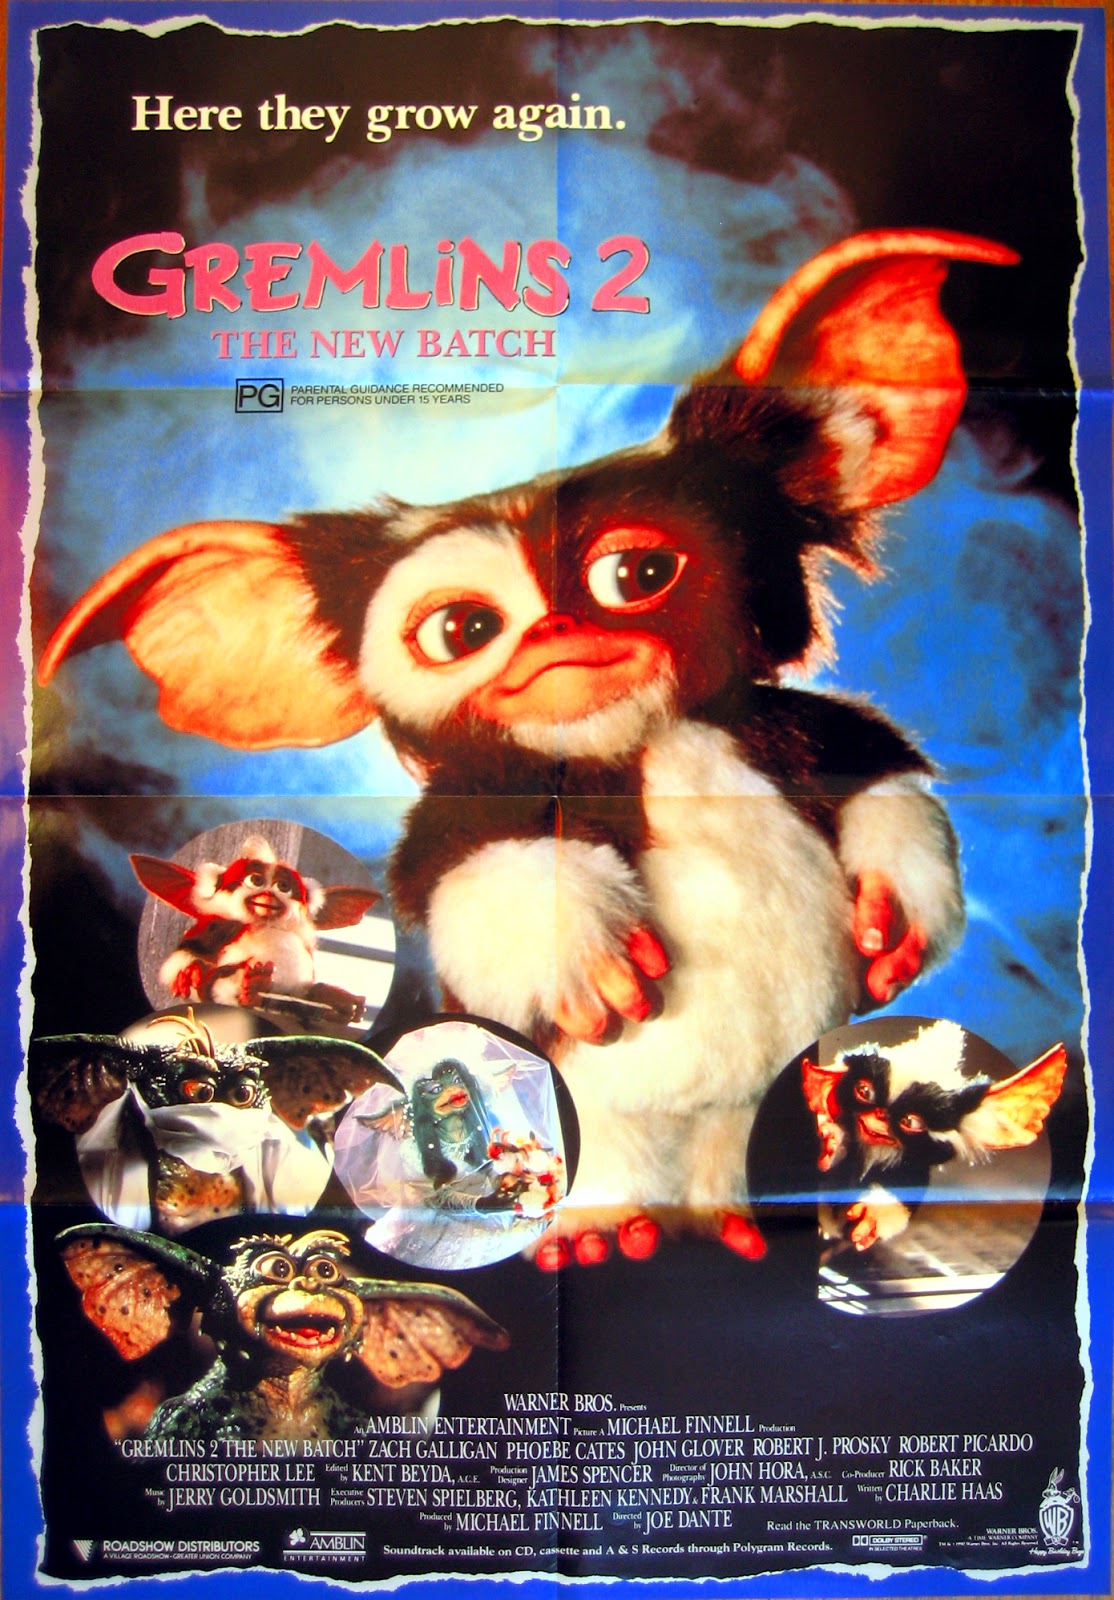 Gremlins 2 The New Batch wallpapers, Movie, HQ Gremlins 2 The New